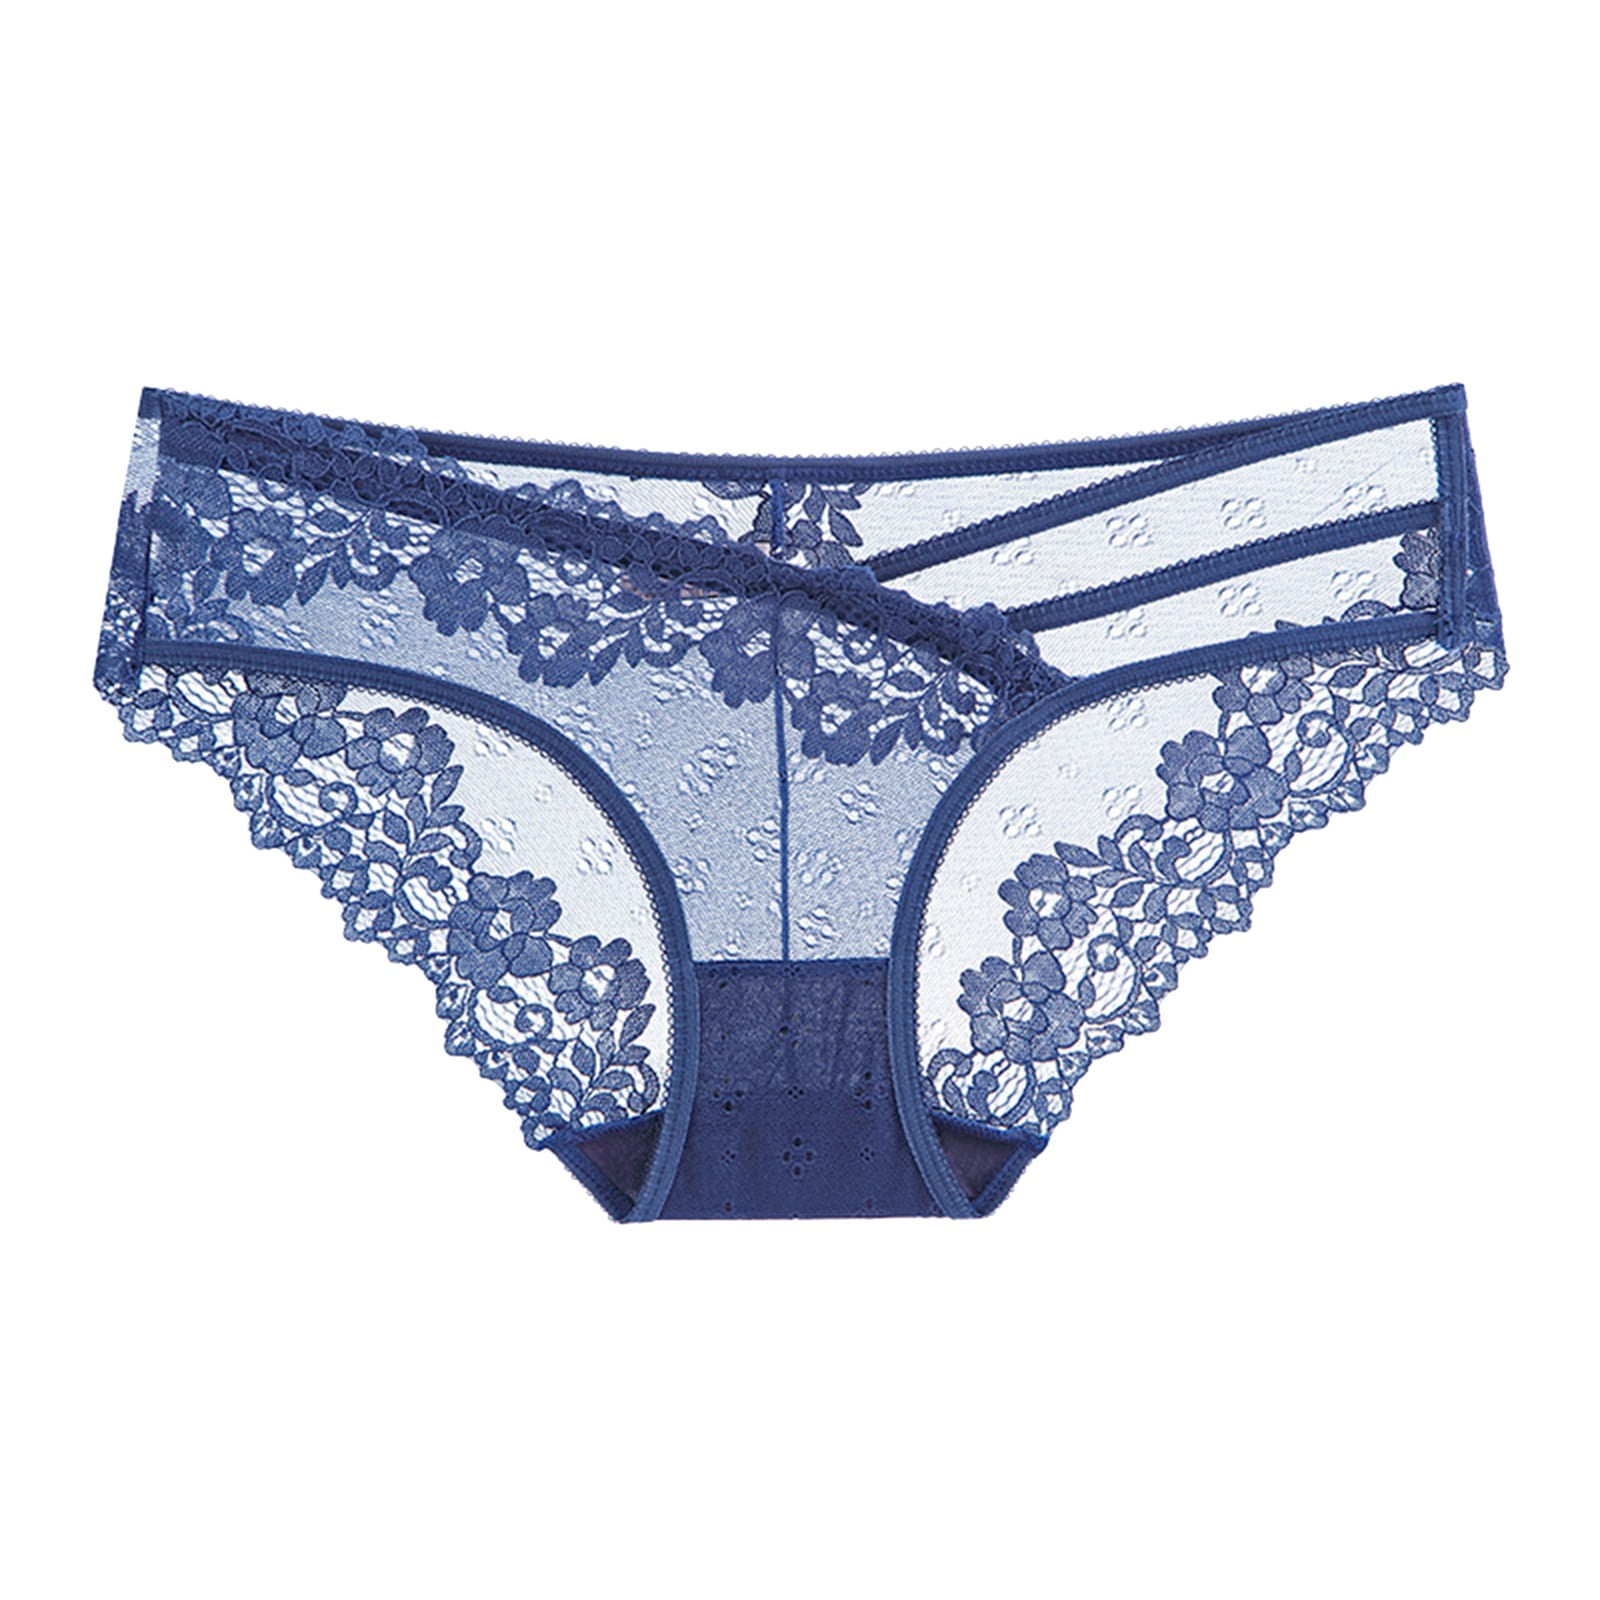 Cathalem High Cut Lace Panties for Women Womens Fit Microfiber Panties  Wicking Underwear And No Show Underwear for Leggings Underpants Dark Blue